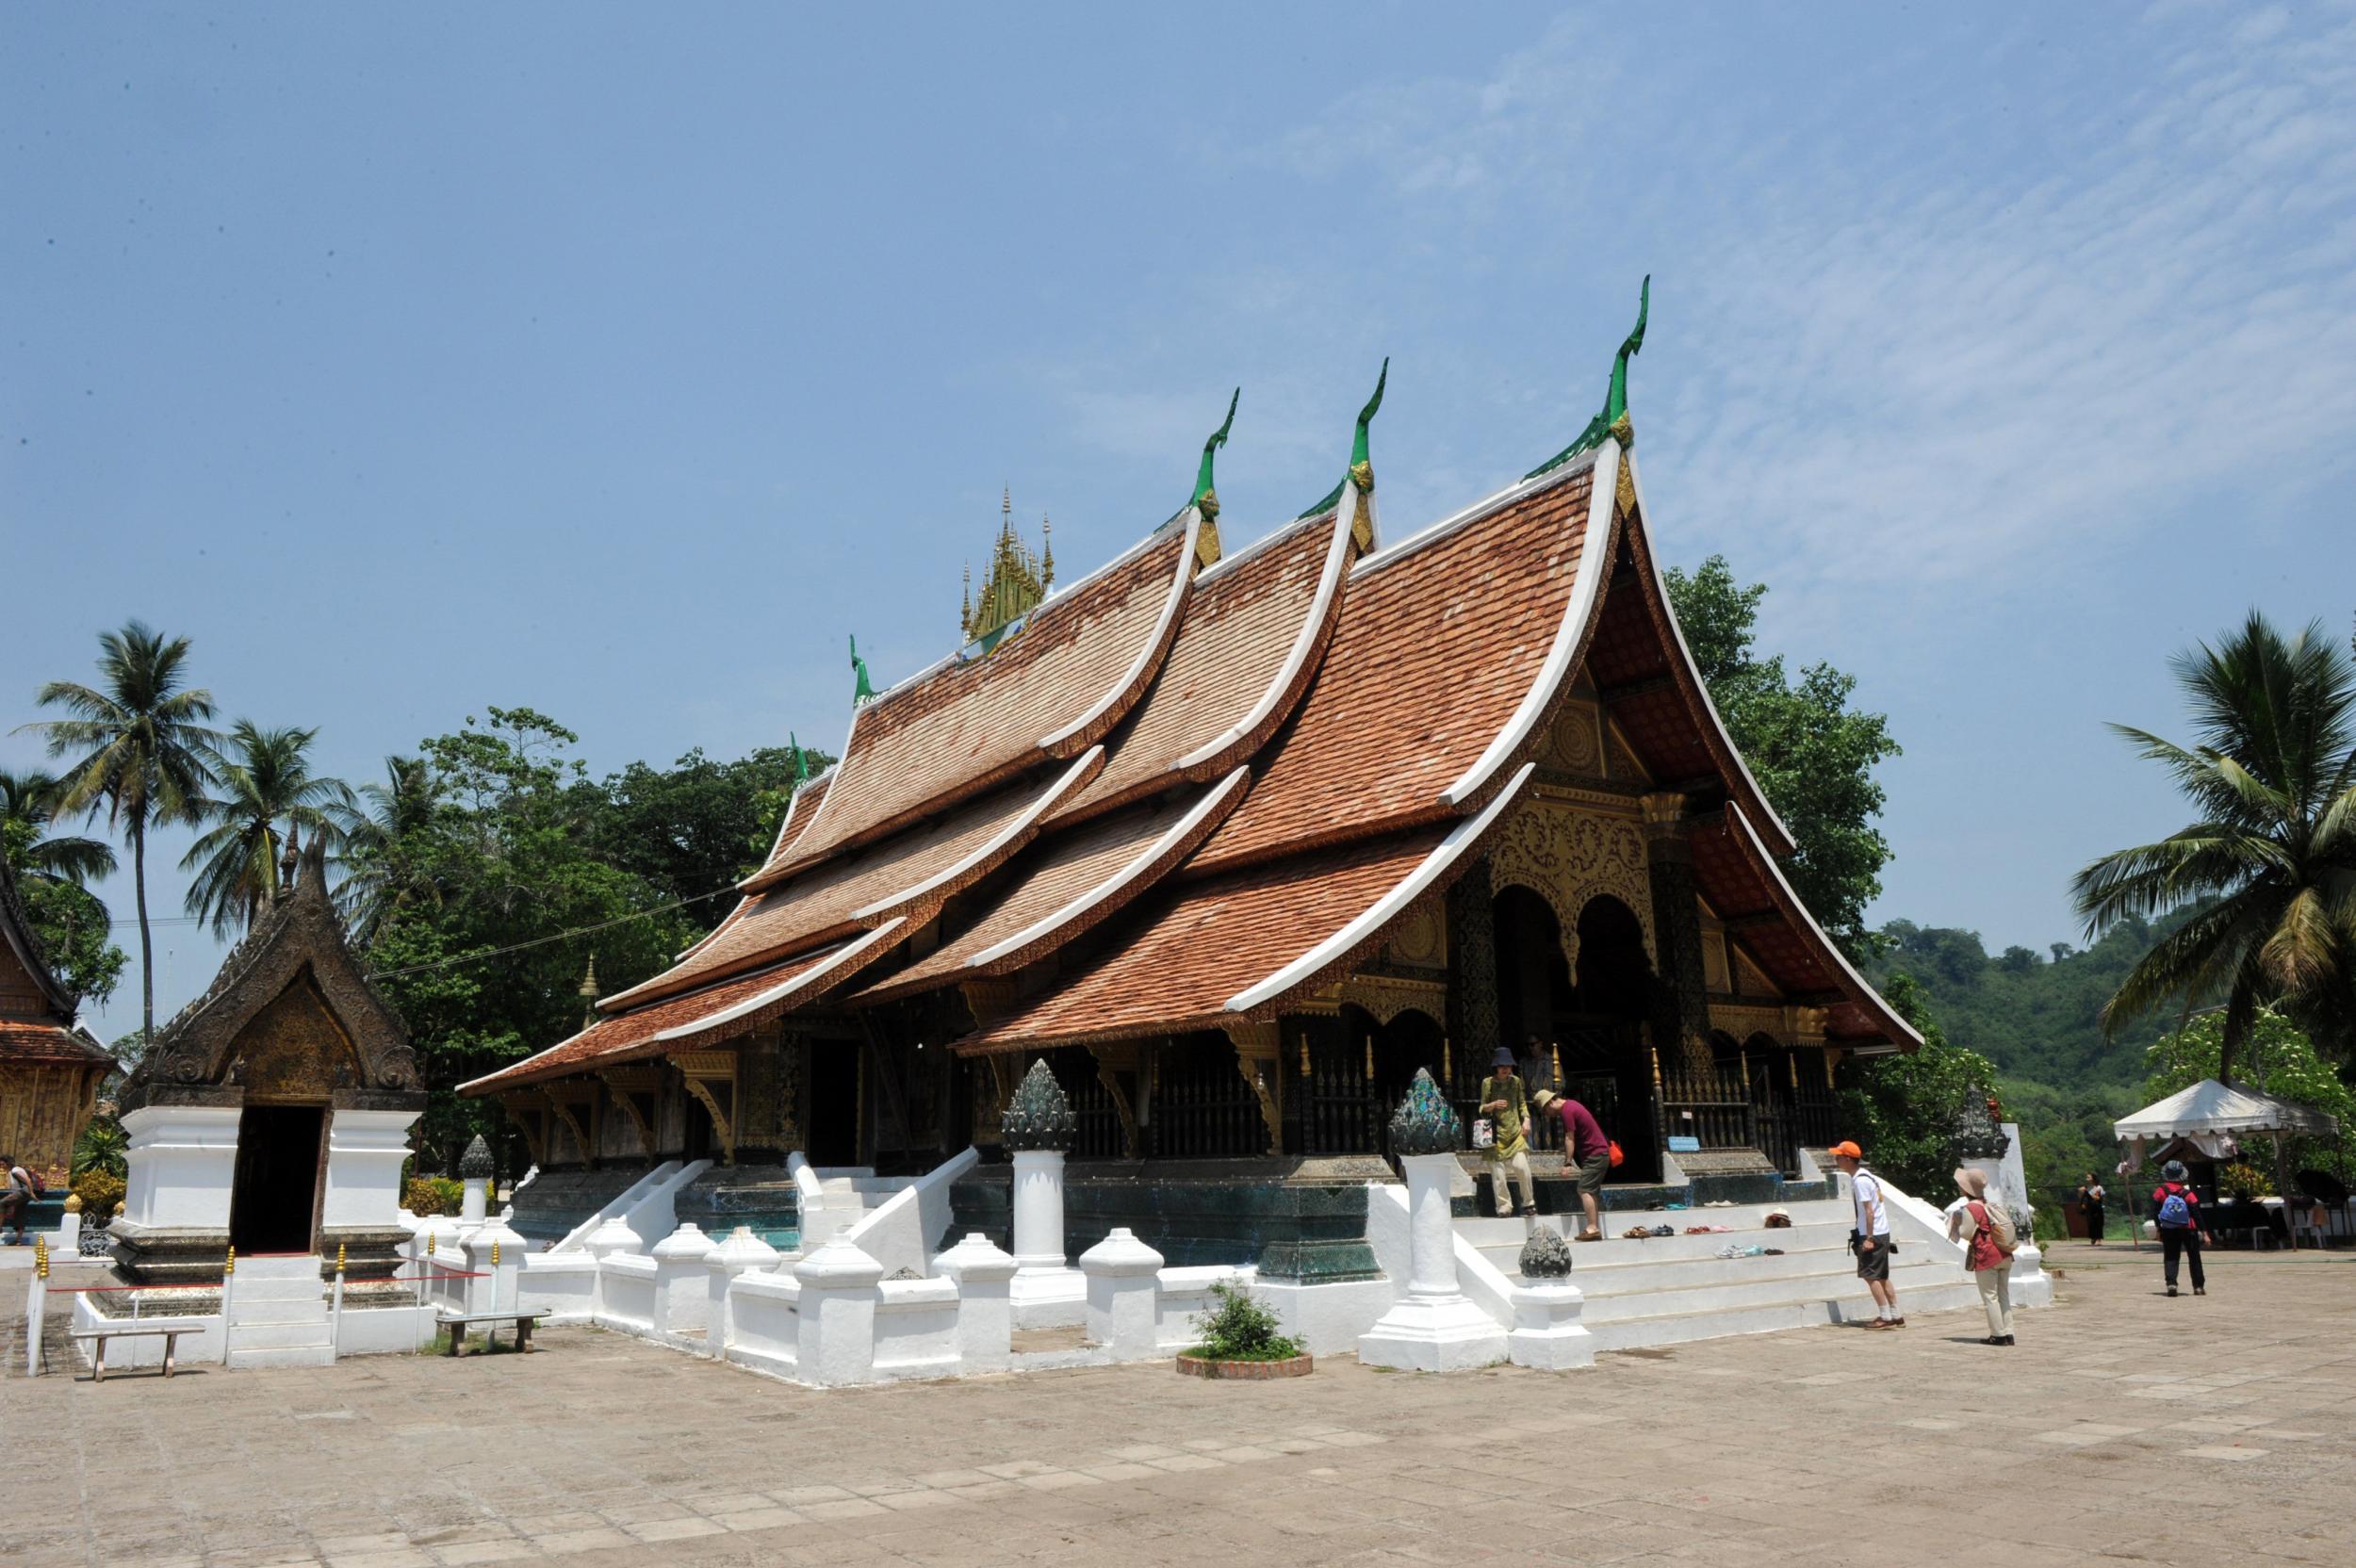 The Temple of the Golden City in Luang Prabang